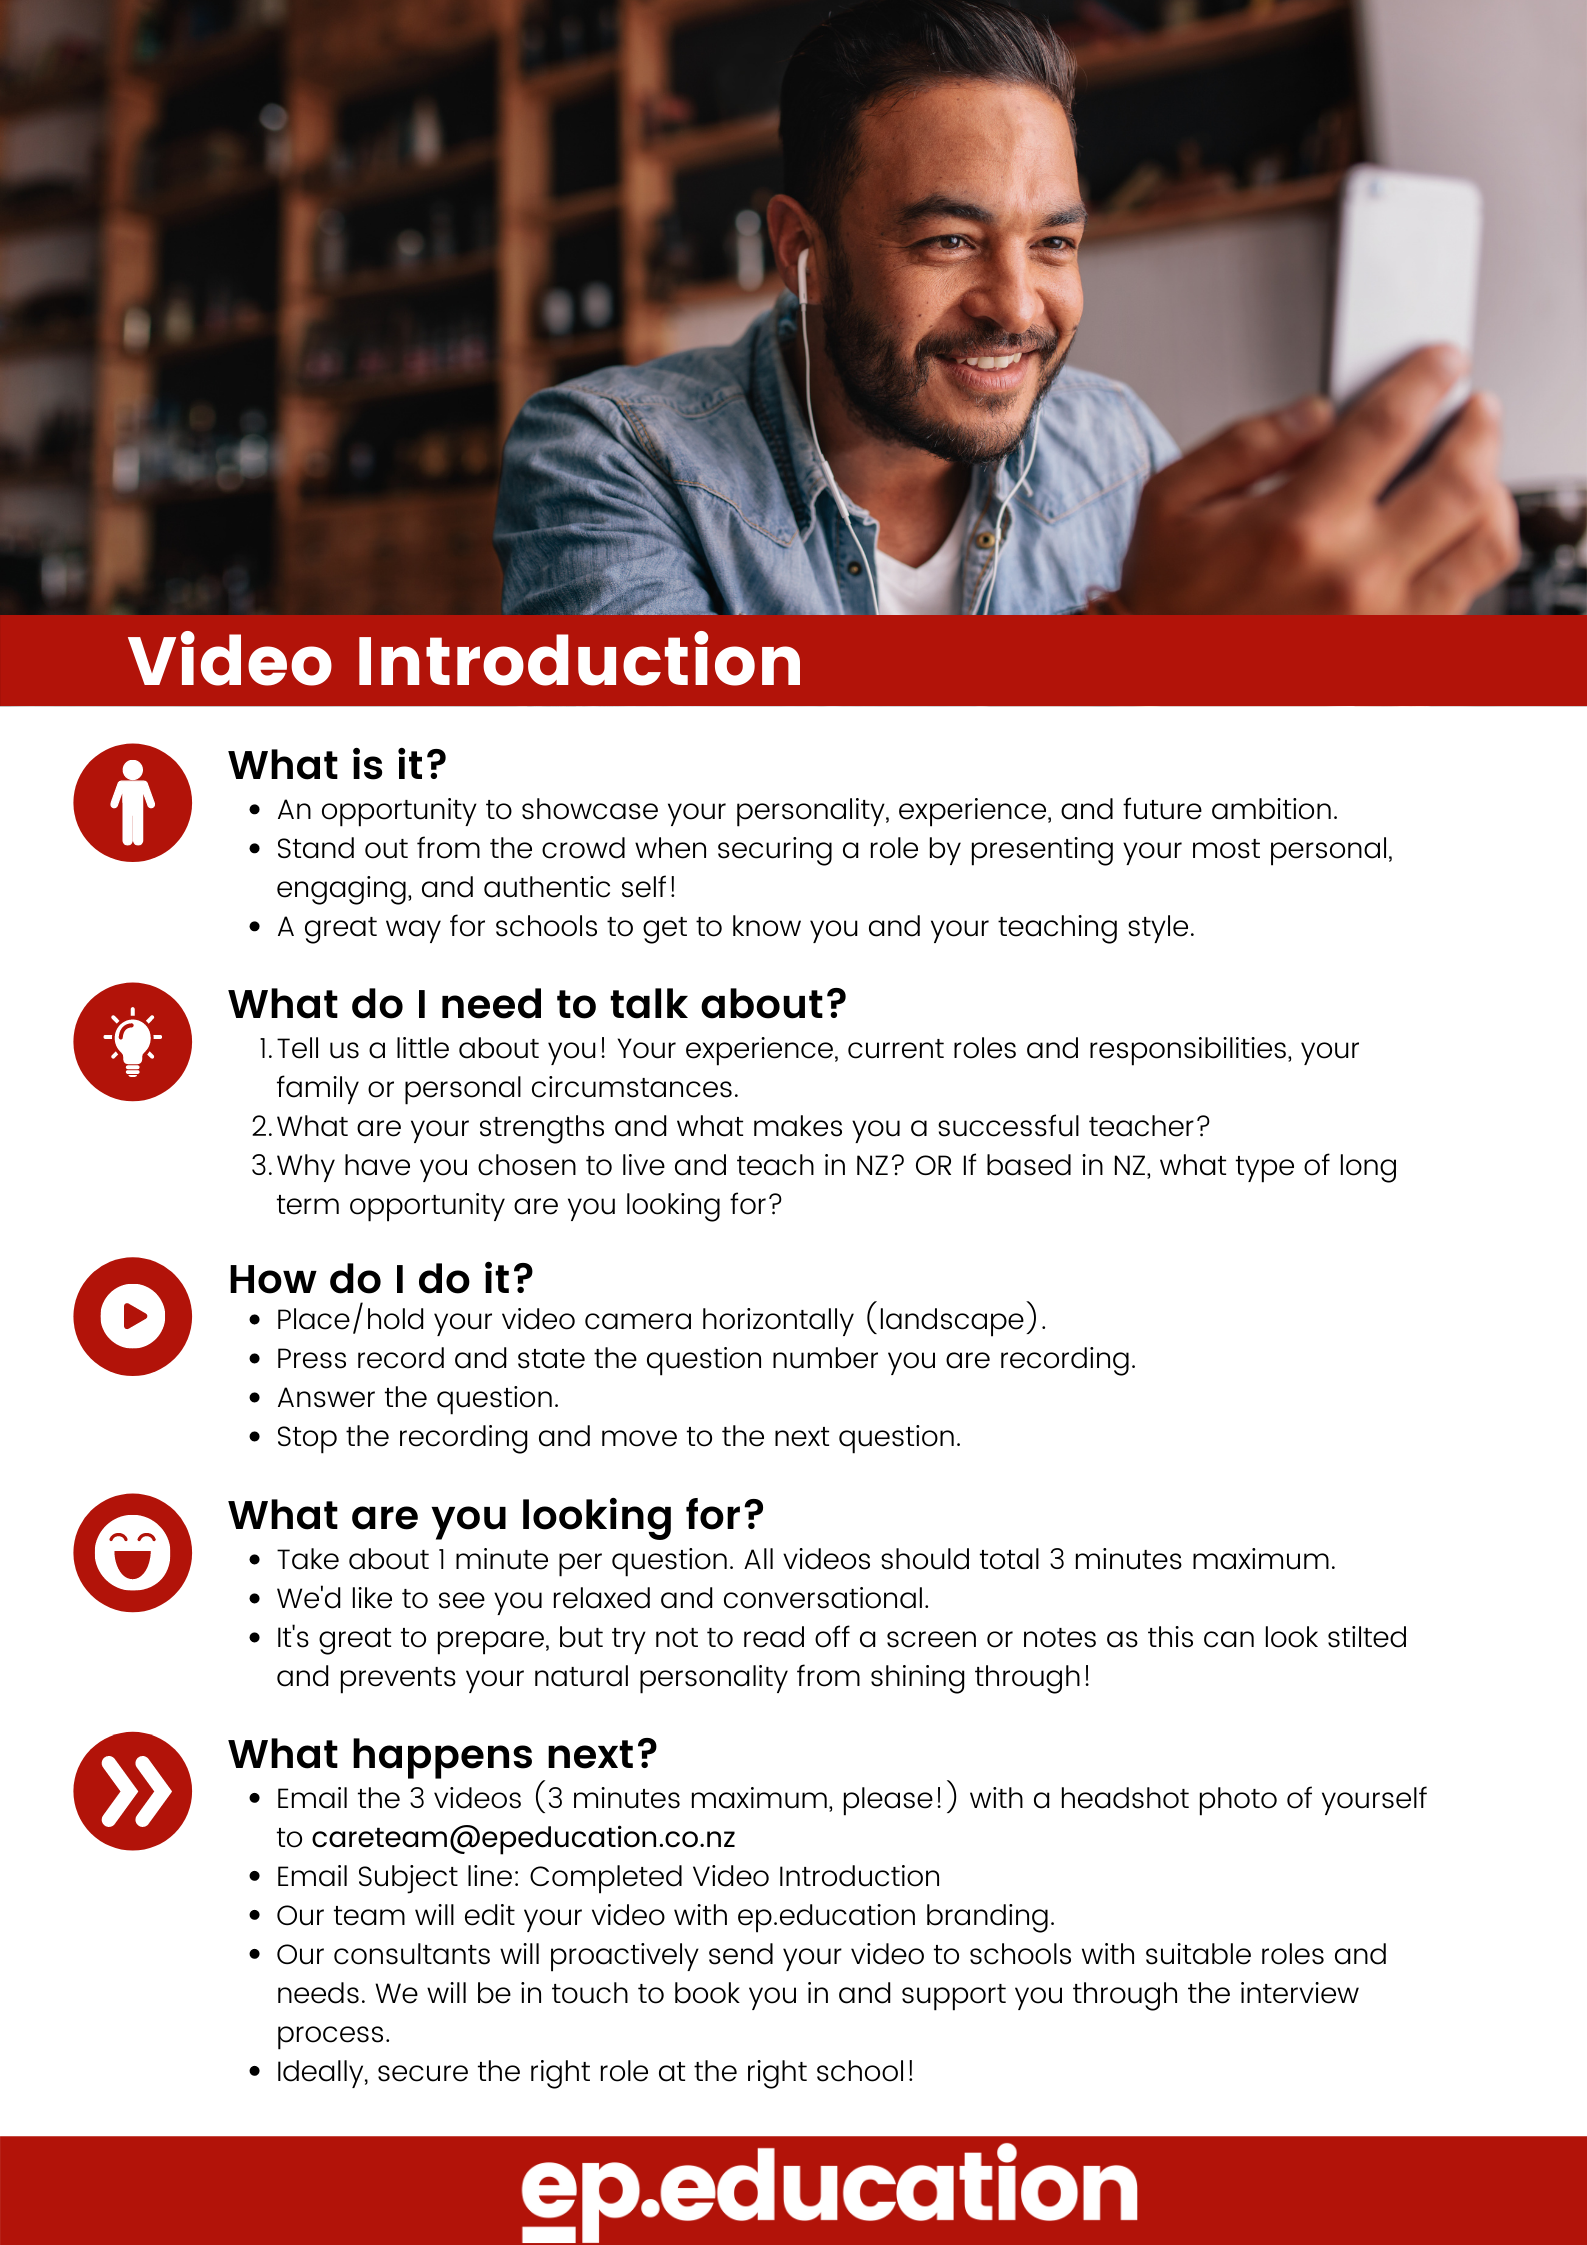 Video Introduction Instructions